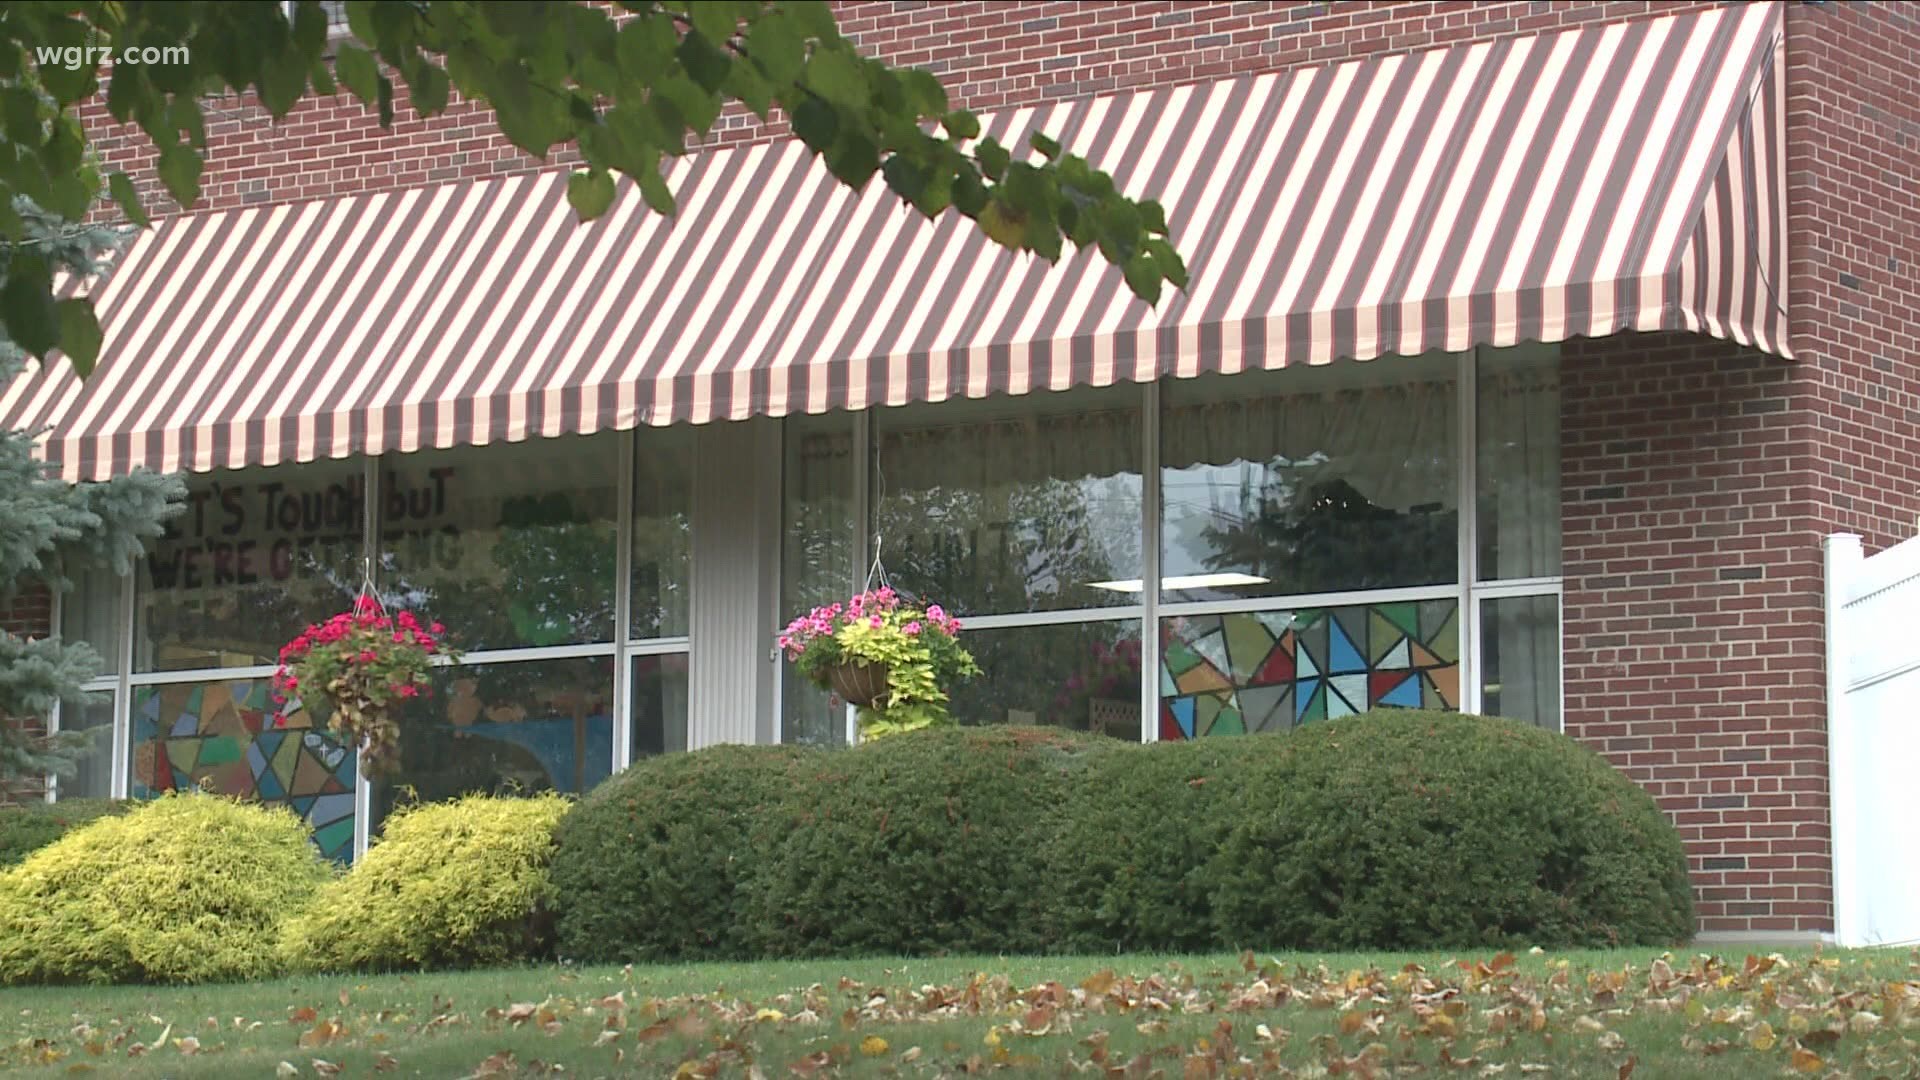 Because of the overwhelming response to today drive up COVID-19 clinic in Allegany County, the Health Department there says another one will be happening tomorrow.